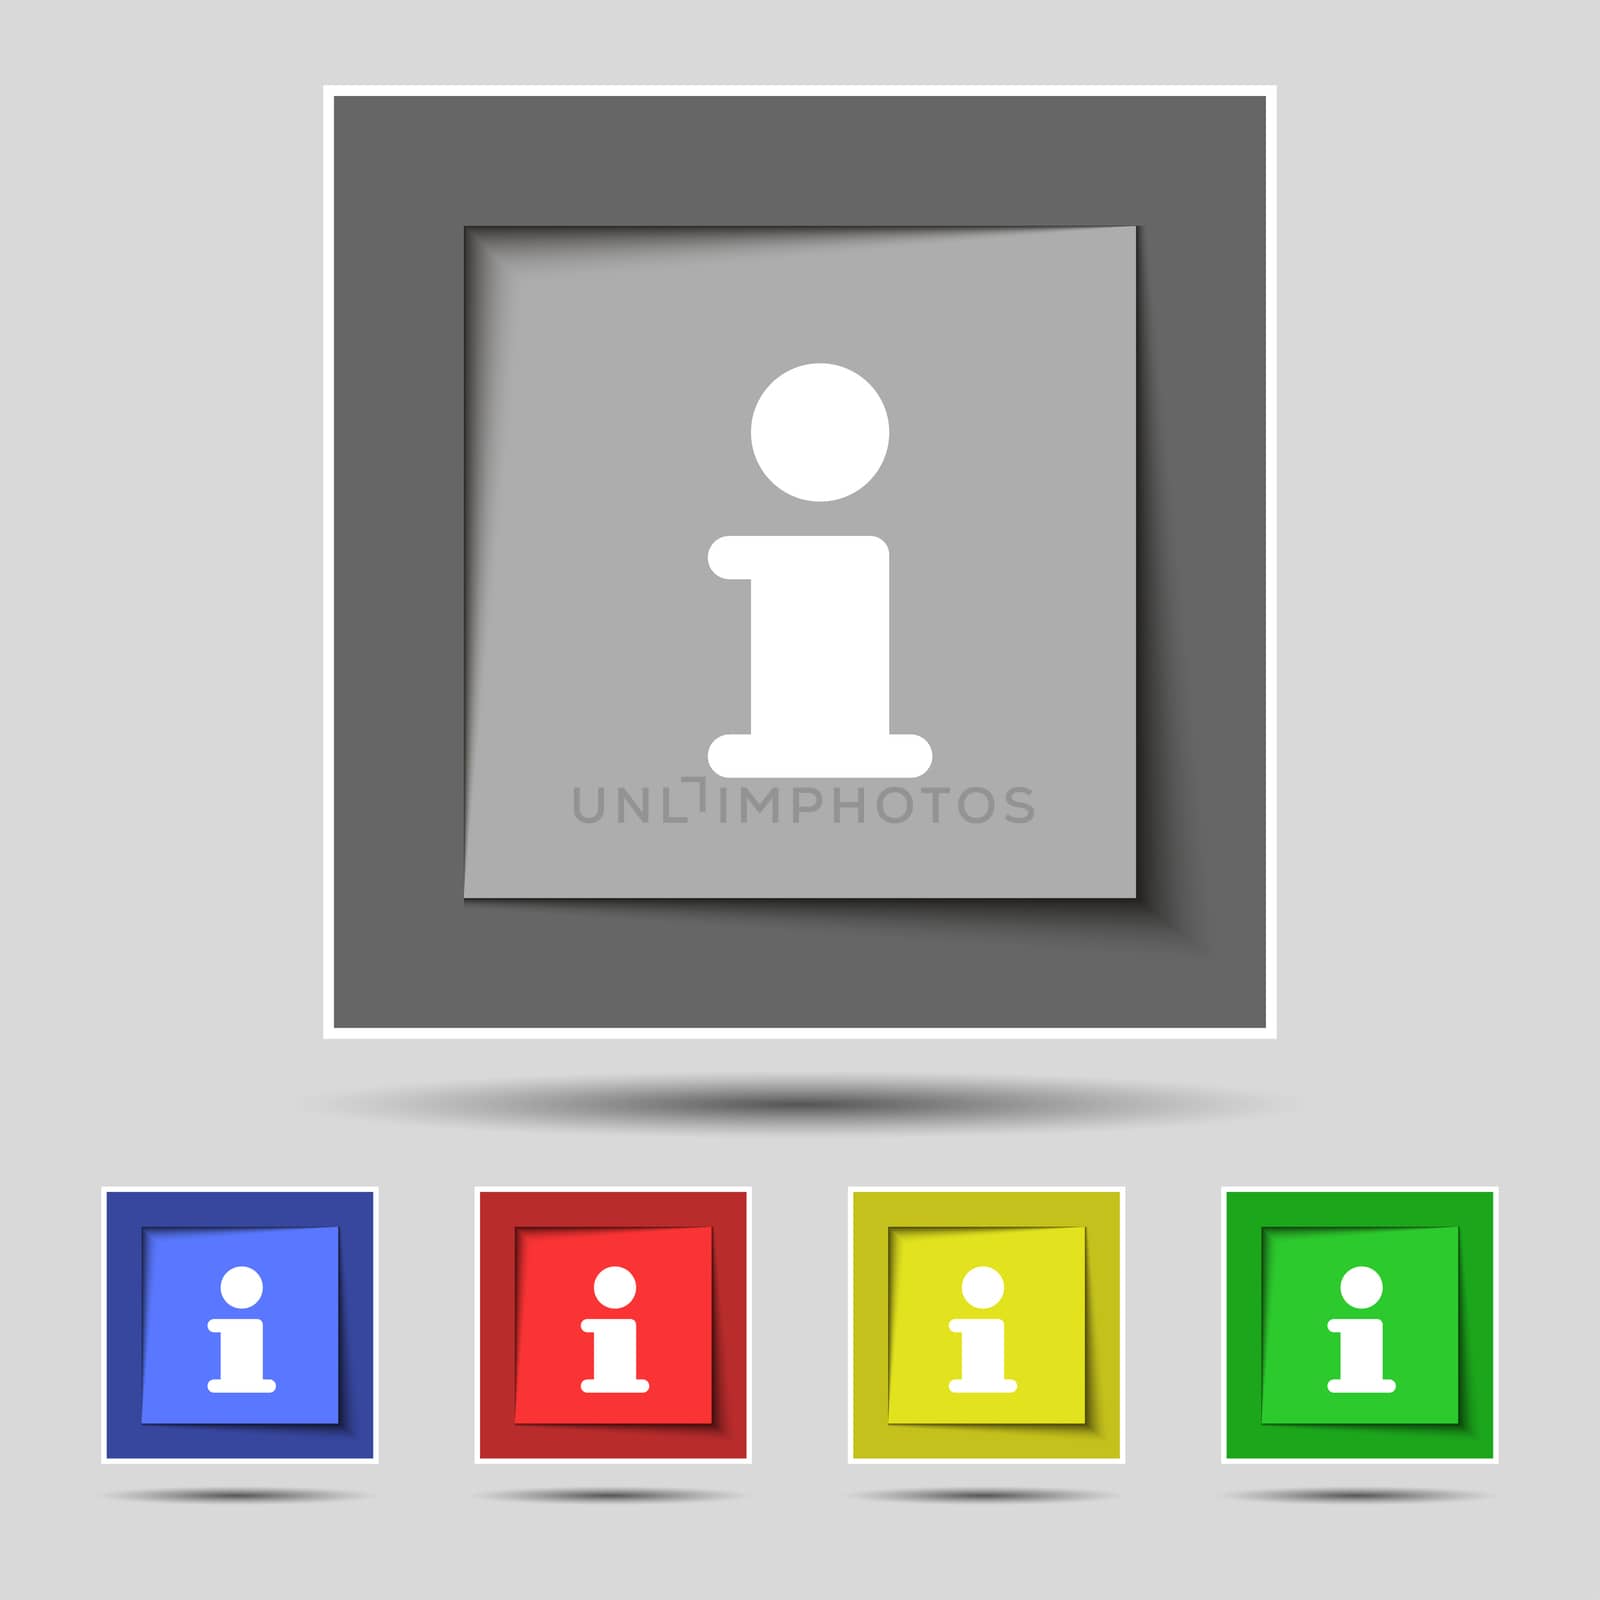 Information, Info icon sign on the original five colored buttons. illustration